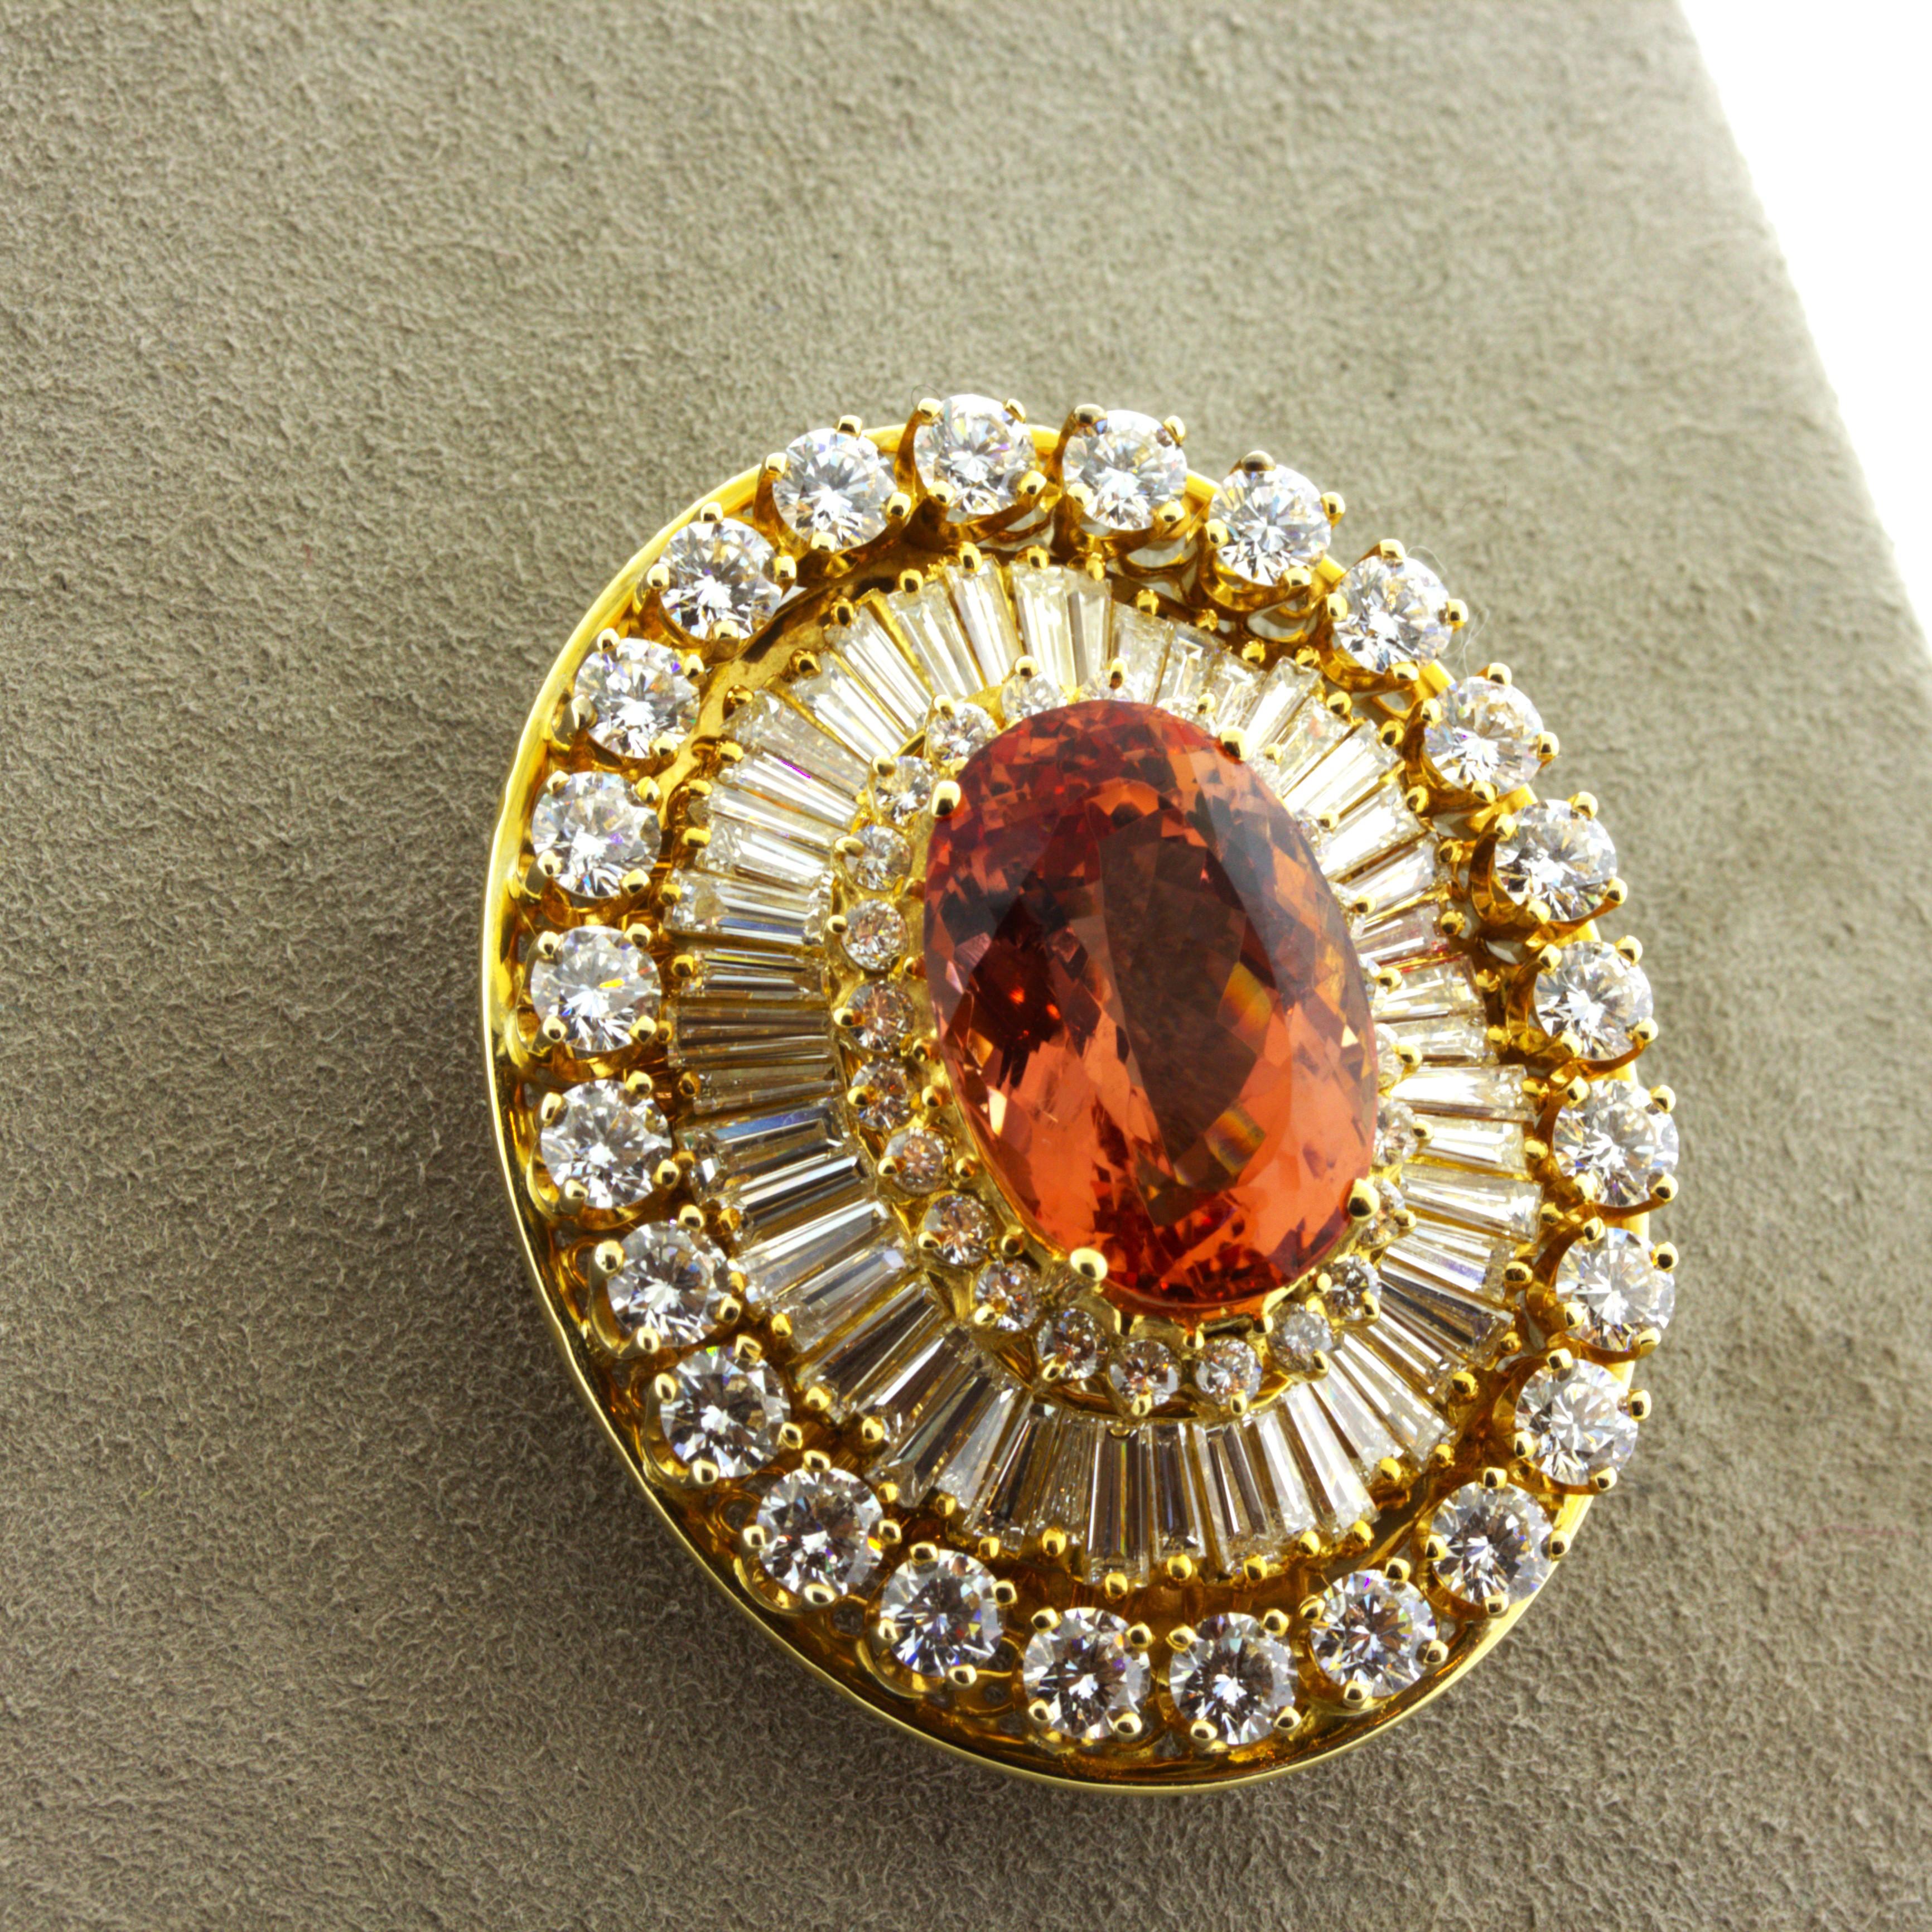 Round Cut Superb Imperial Topaz Diamond 18K Yellow Gold Brooch, AGL Certified For Sale